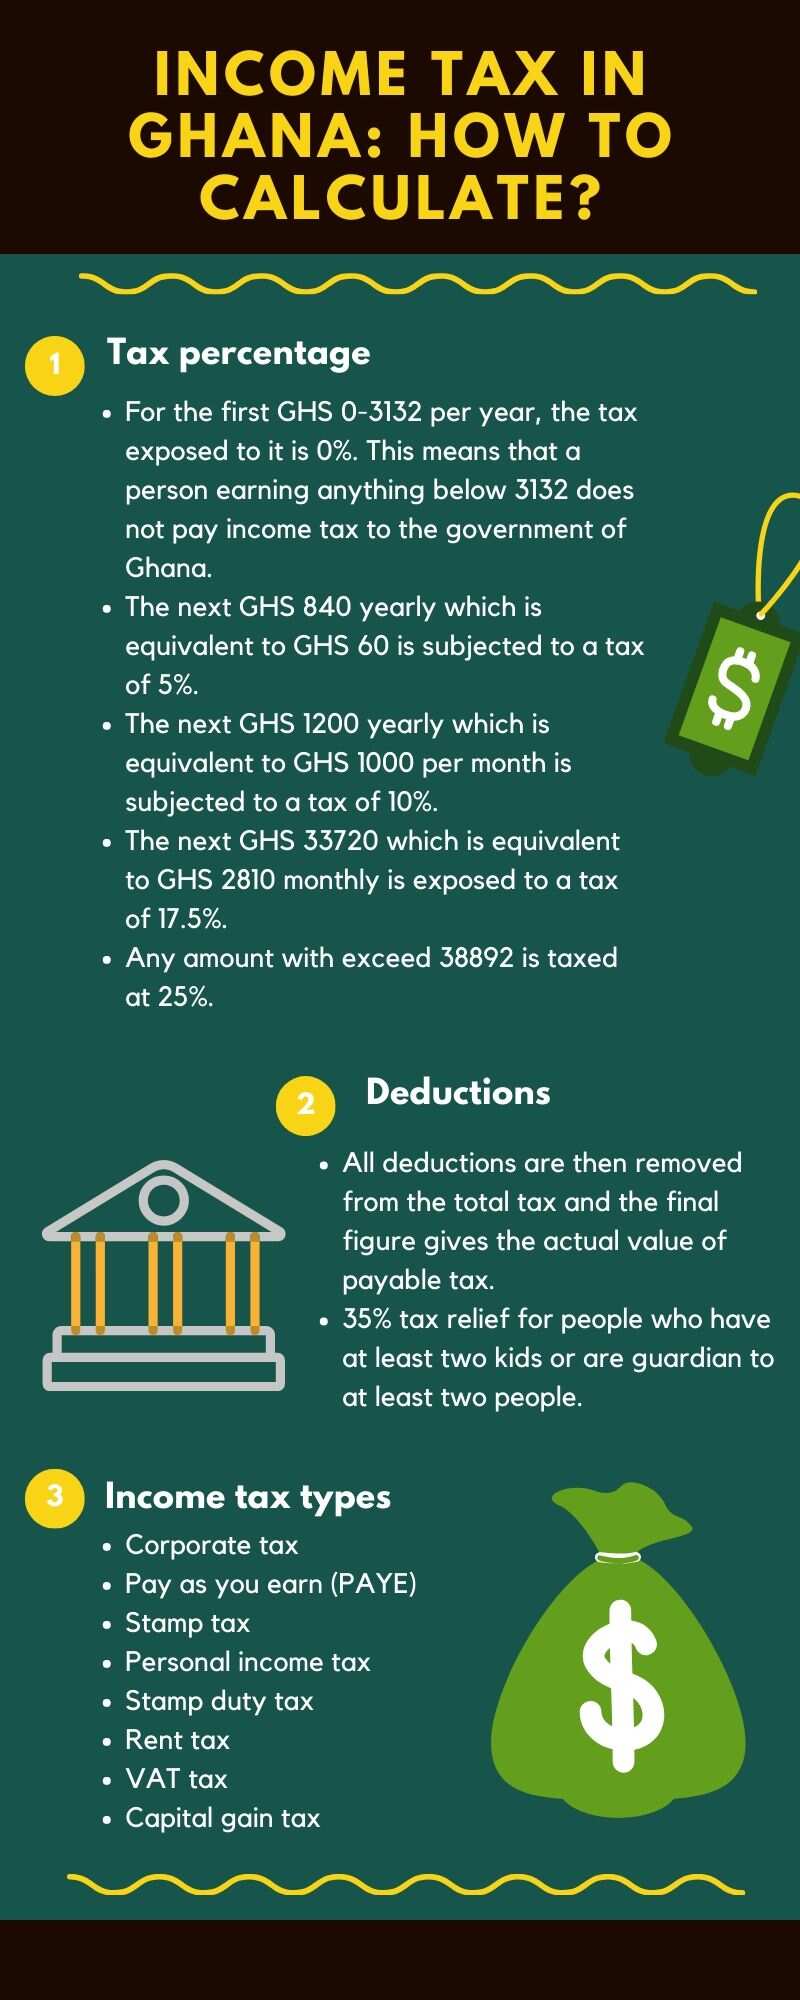 tax in Ghana 2020 how to calculate?